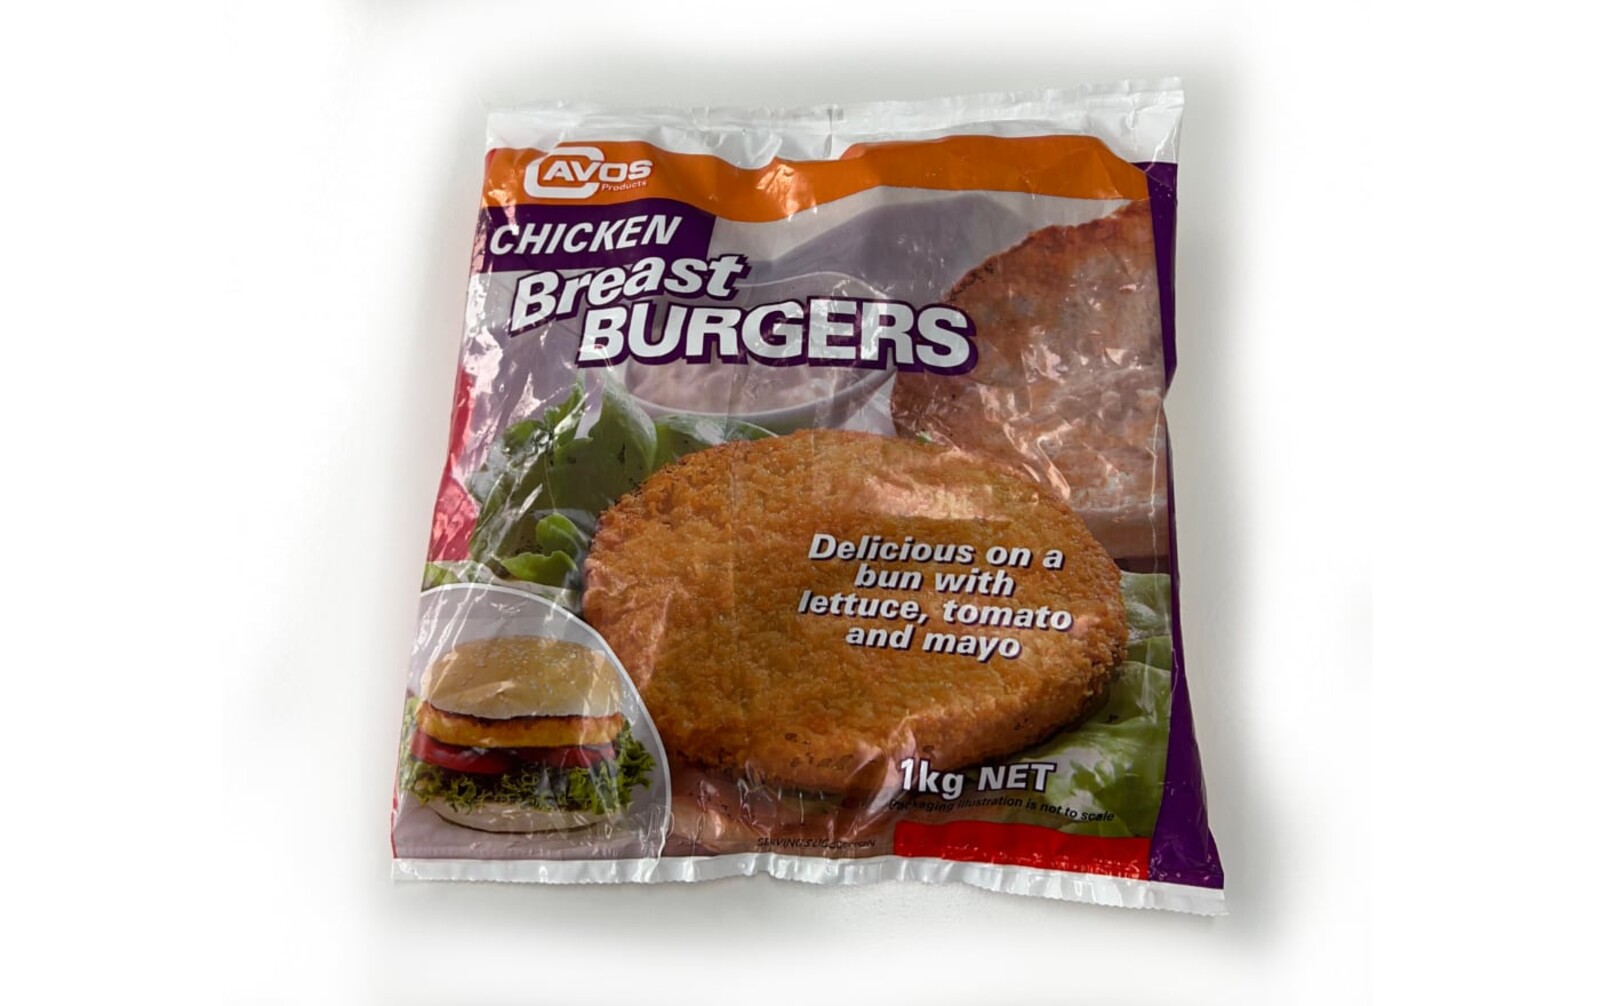 Cavos Products Chicken Breast Burgers